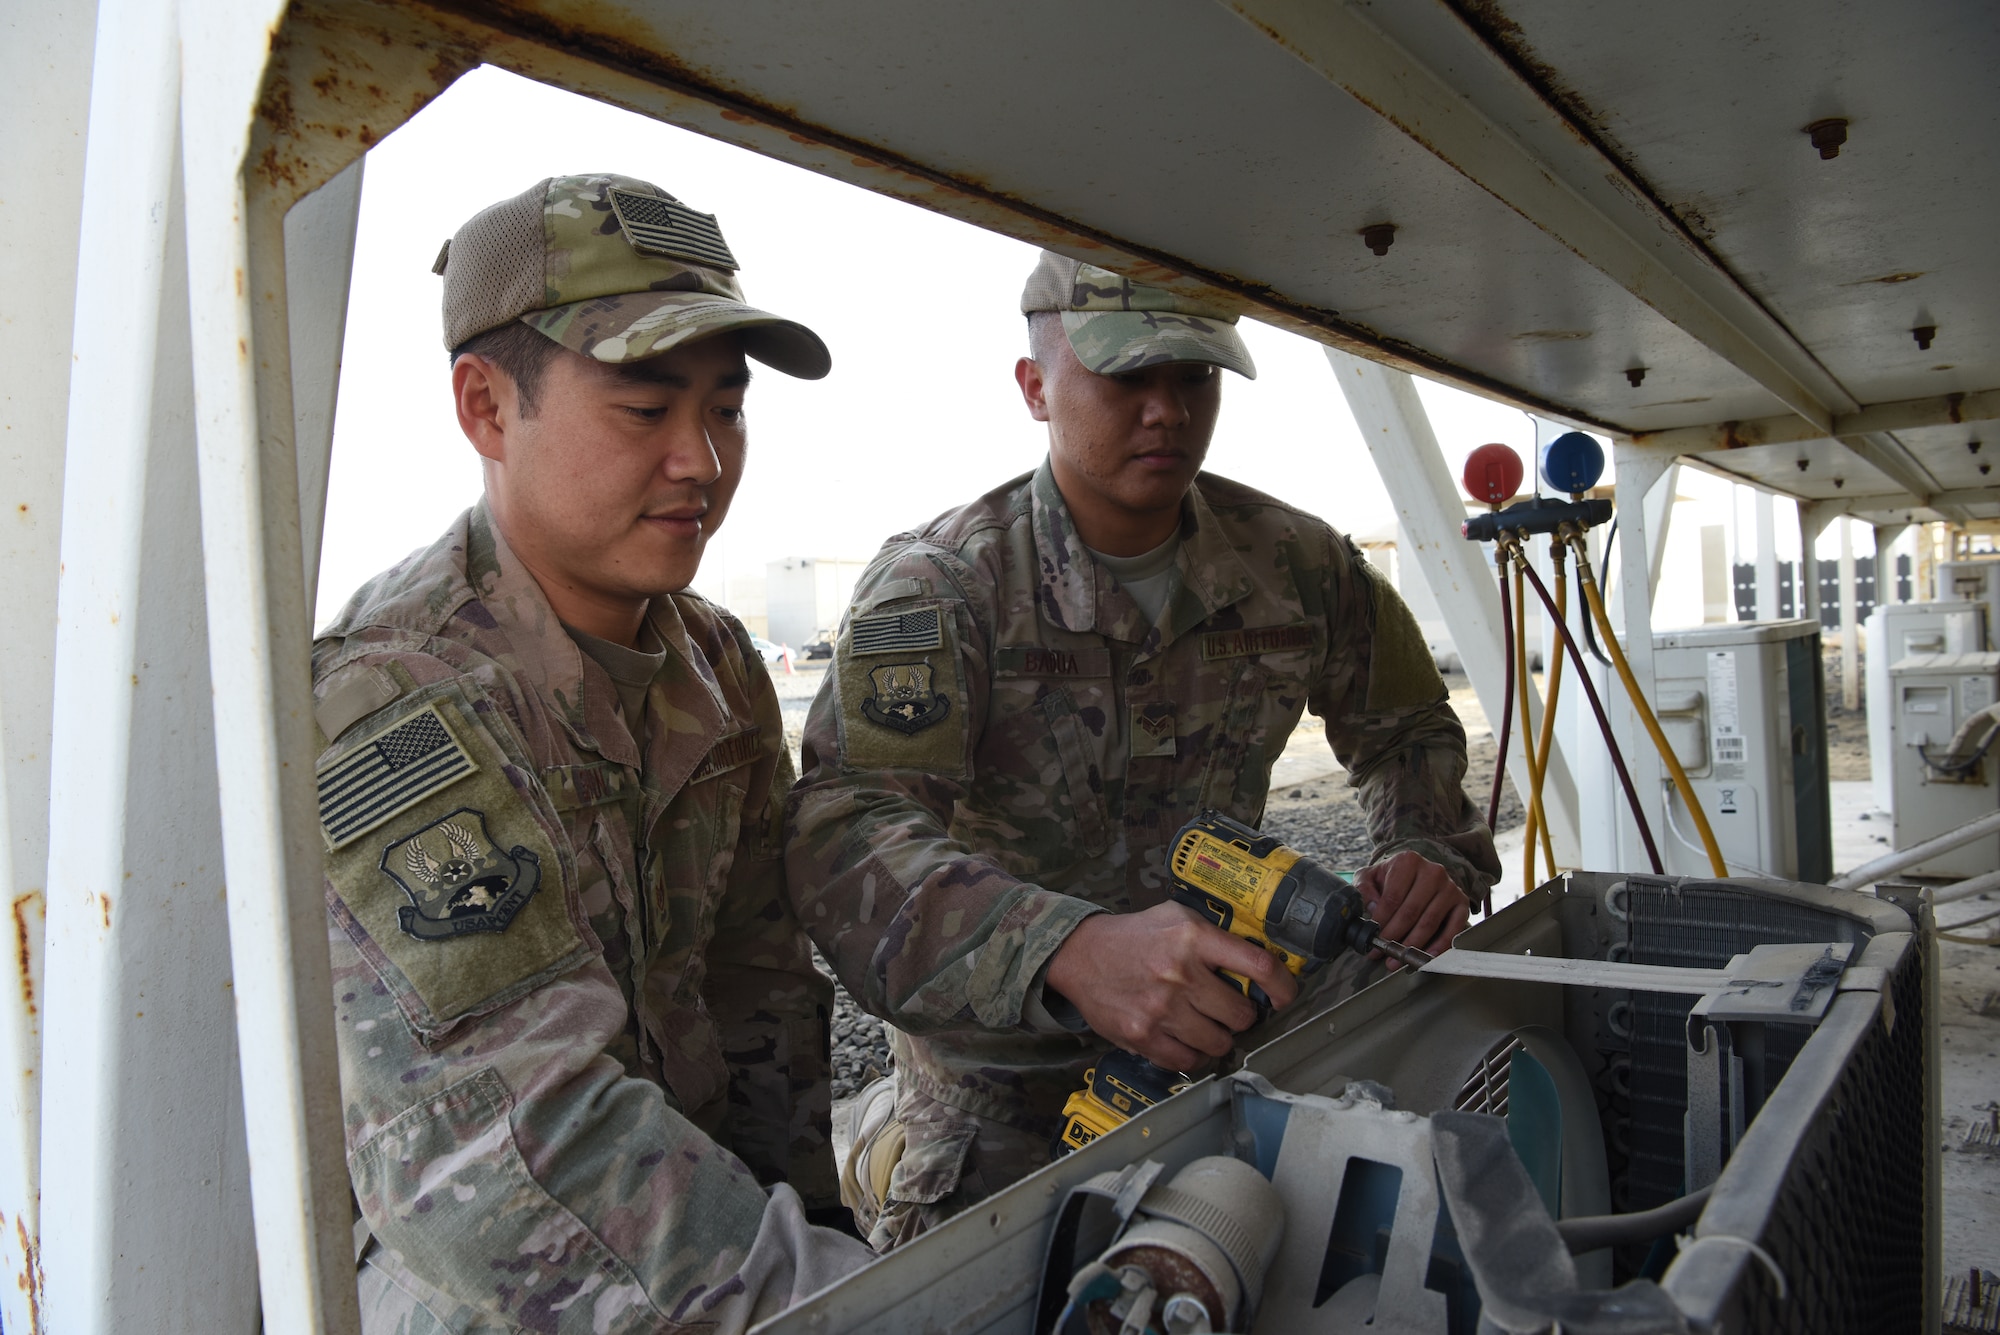 624th Civil Engineer Squadron Reservists Staff Sgt. Roy Shin, 380th Expeditionary Civil Engineer Squadron heating, ventilation, and air conditioning technician, and Senior Airman Elo Badua, 380th ECES HVAC technician, performs maintenance on an air conditioning unit, Jan. 10, 2019 at Al Dhafra Air Base, United Arab Emirates.